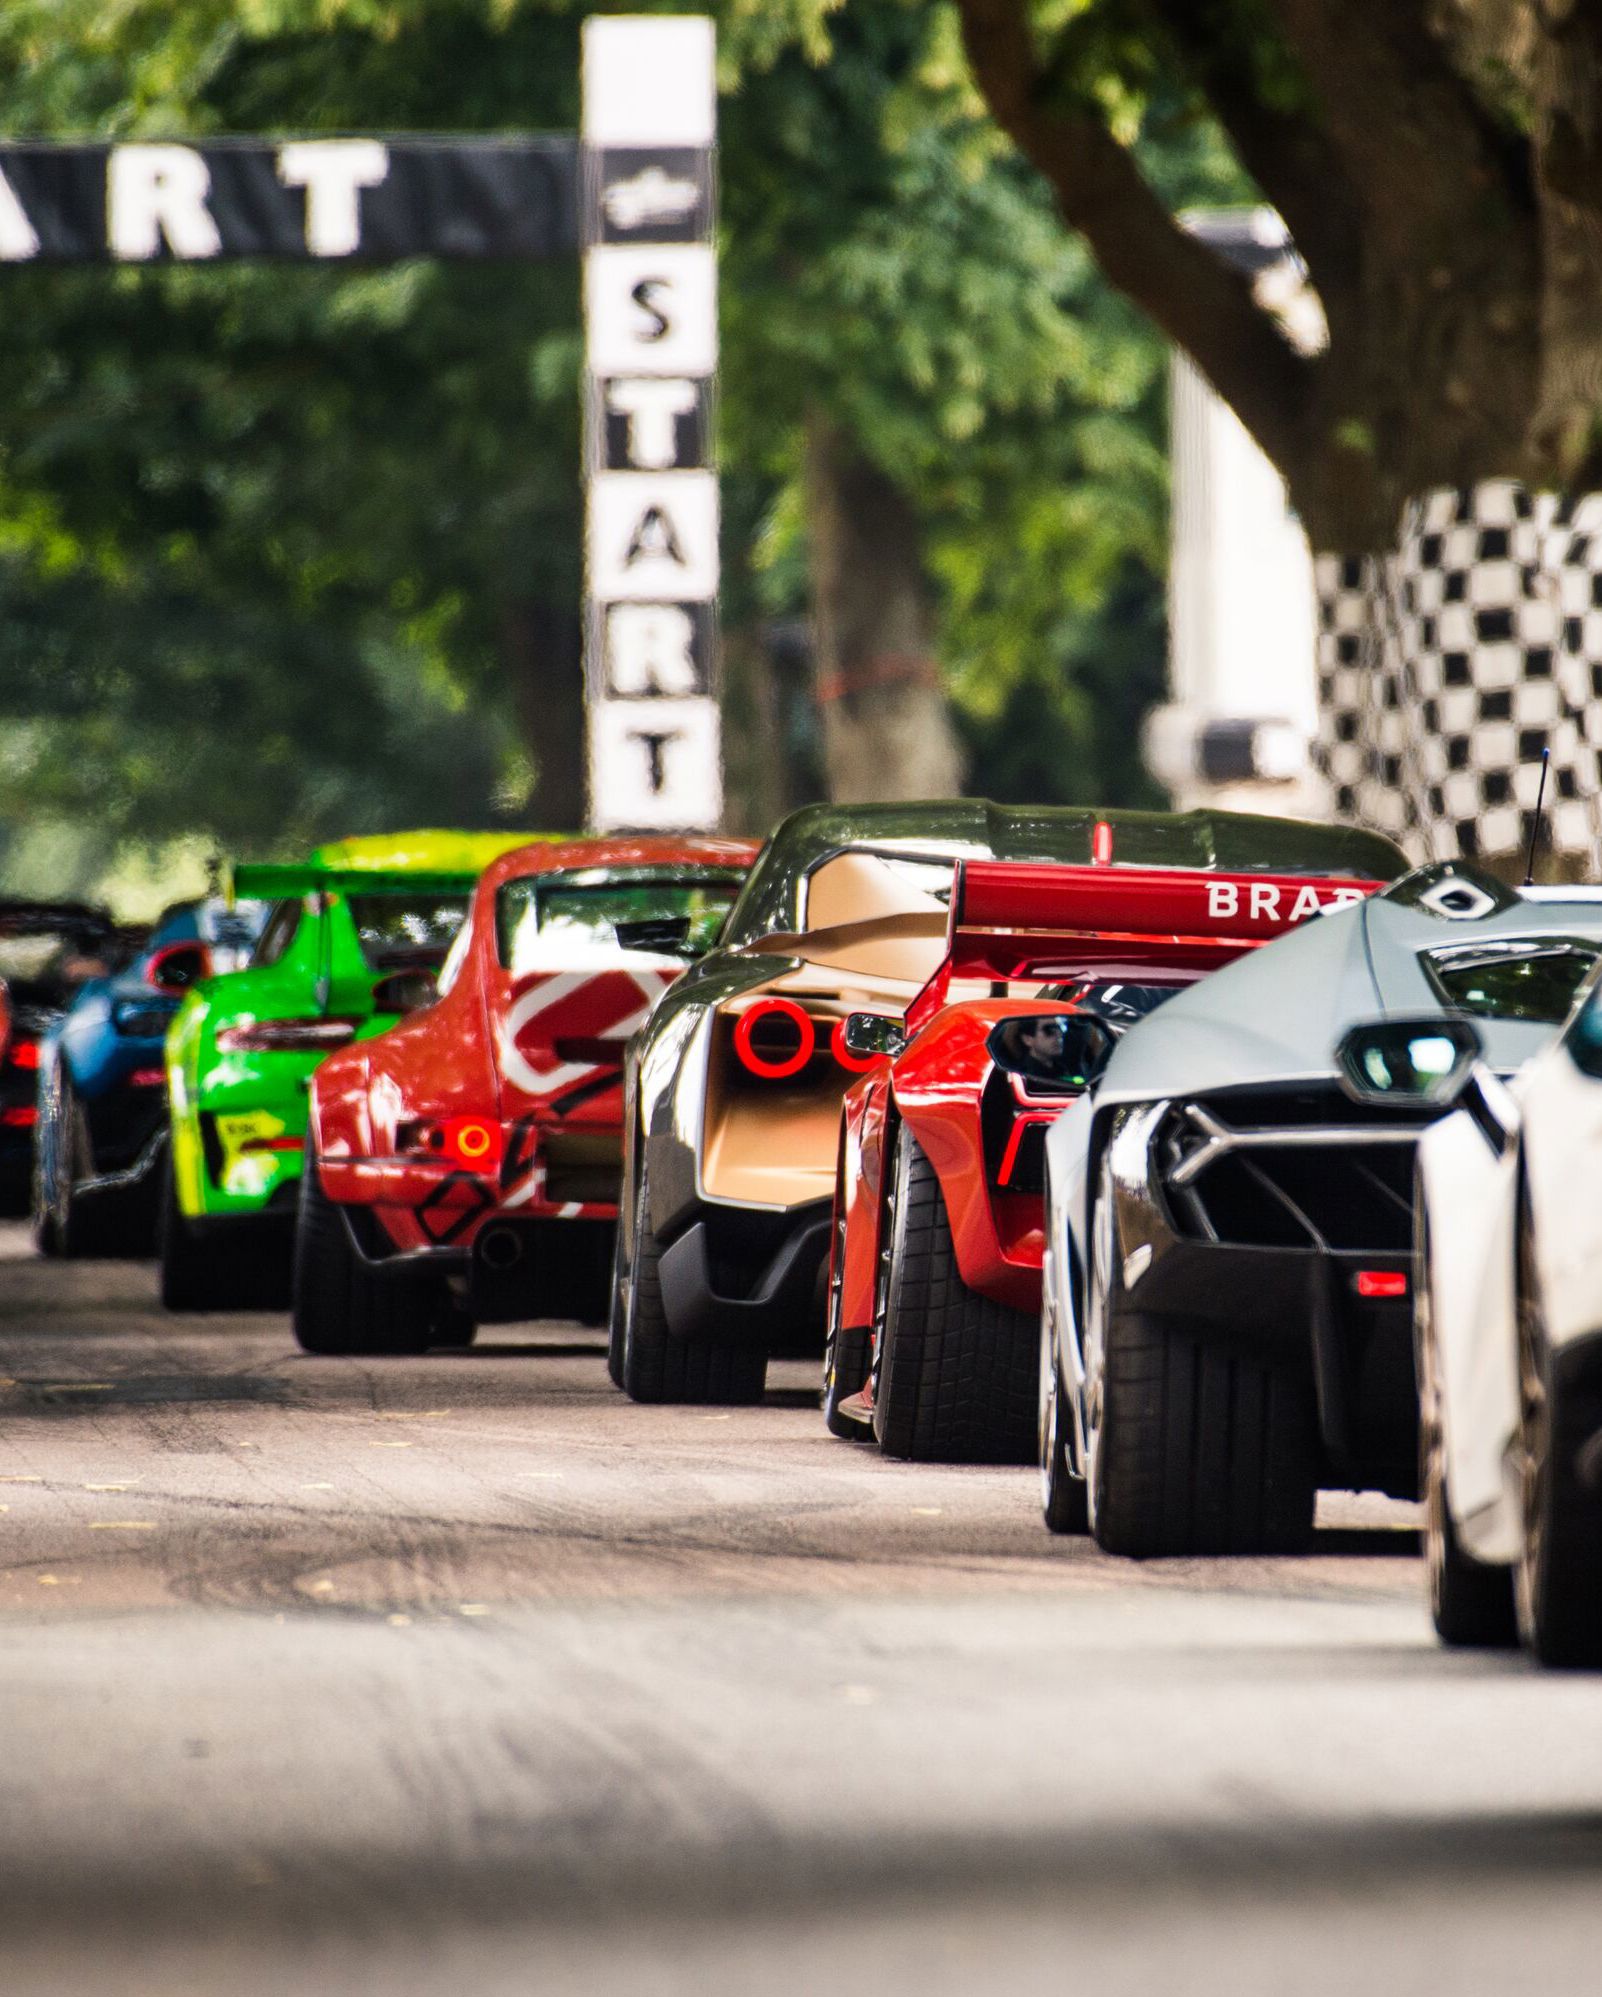 ***FREE TO USE***Supercars wait to do their run up the Hillclimb at the Goodwood Festival of Speed